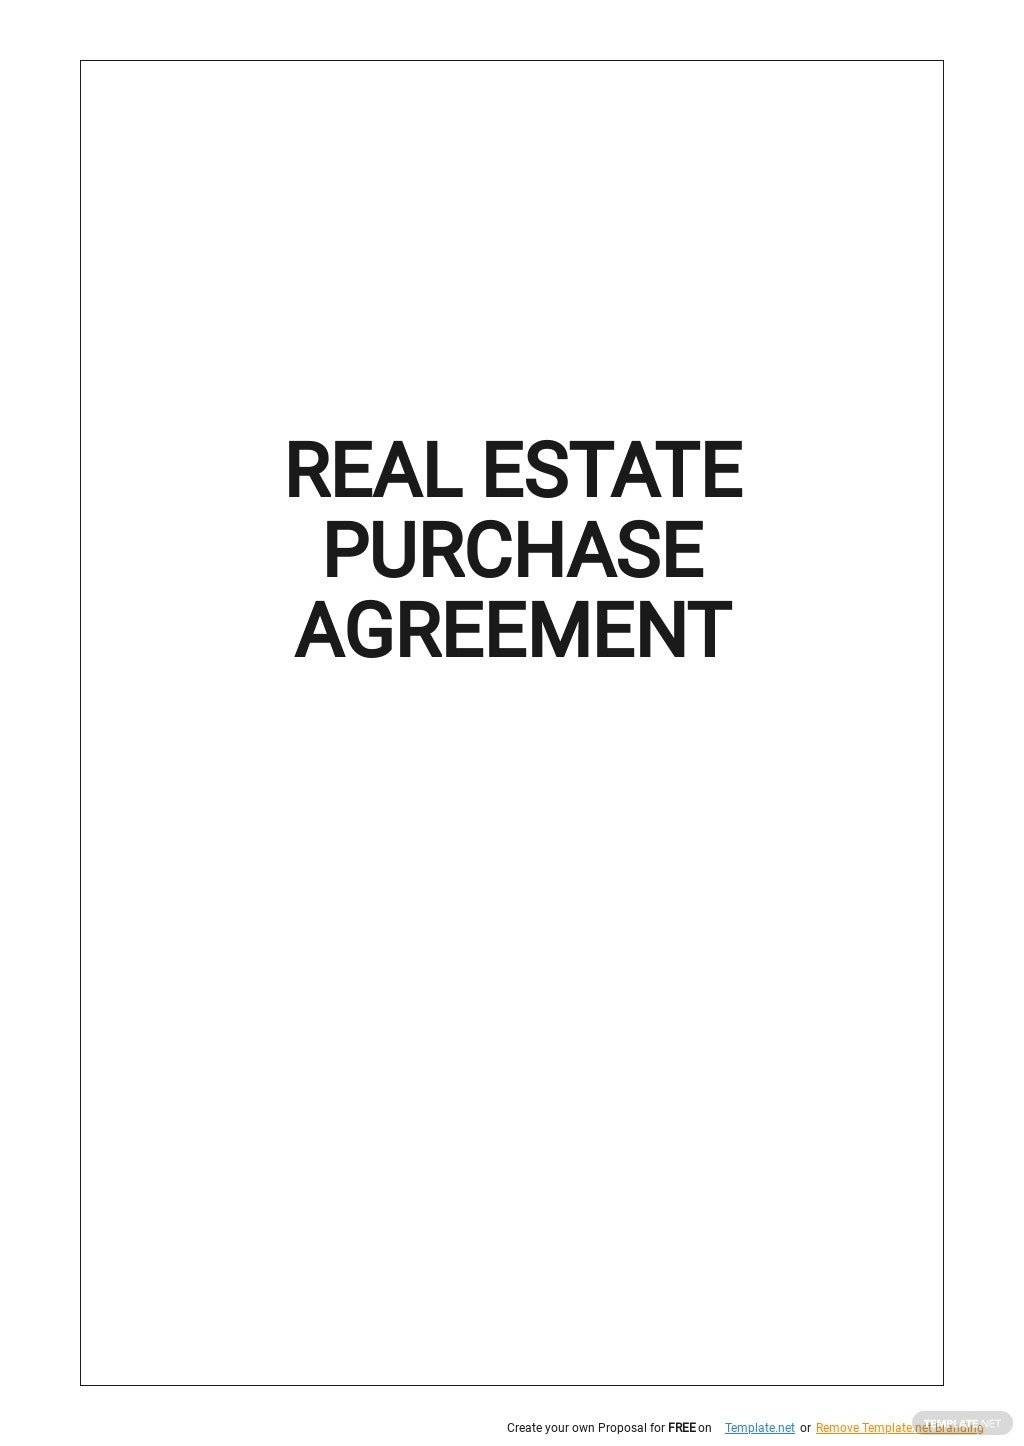 Real Estate Purchase Agreement Template ?width=320